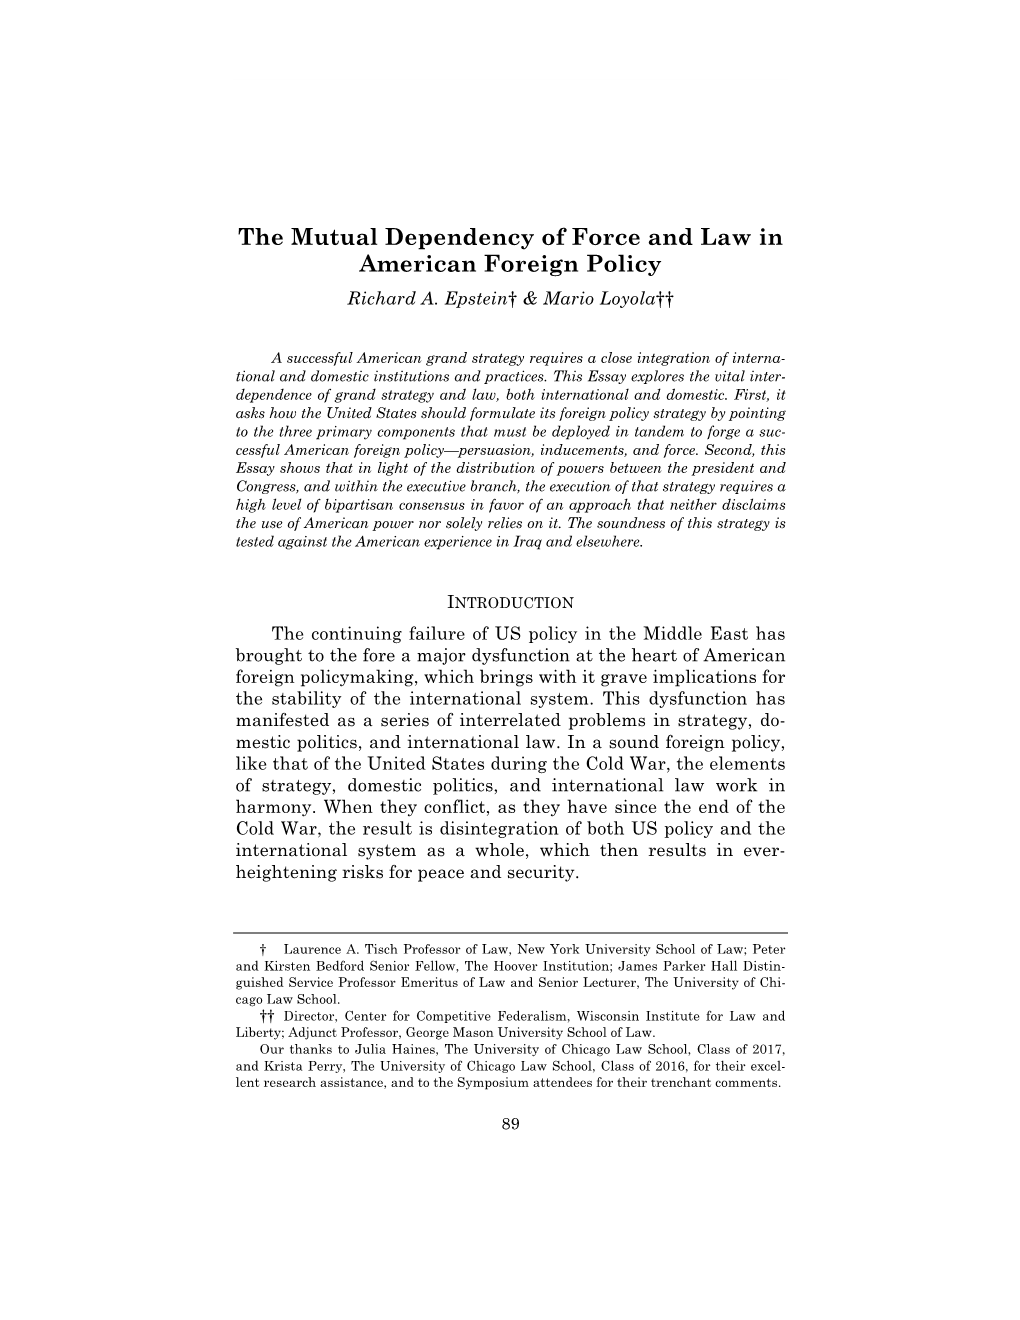 The Mutual Dependency of Force and Law in American Foreign Policy Richard A